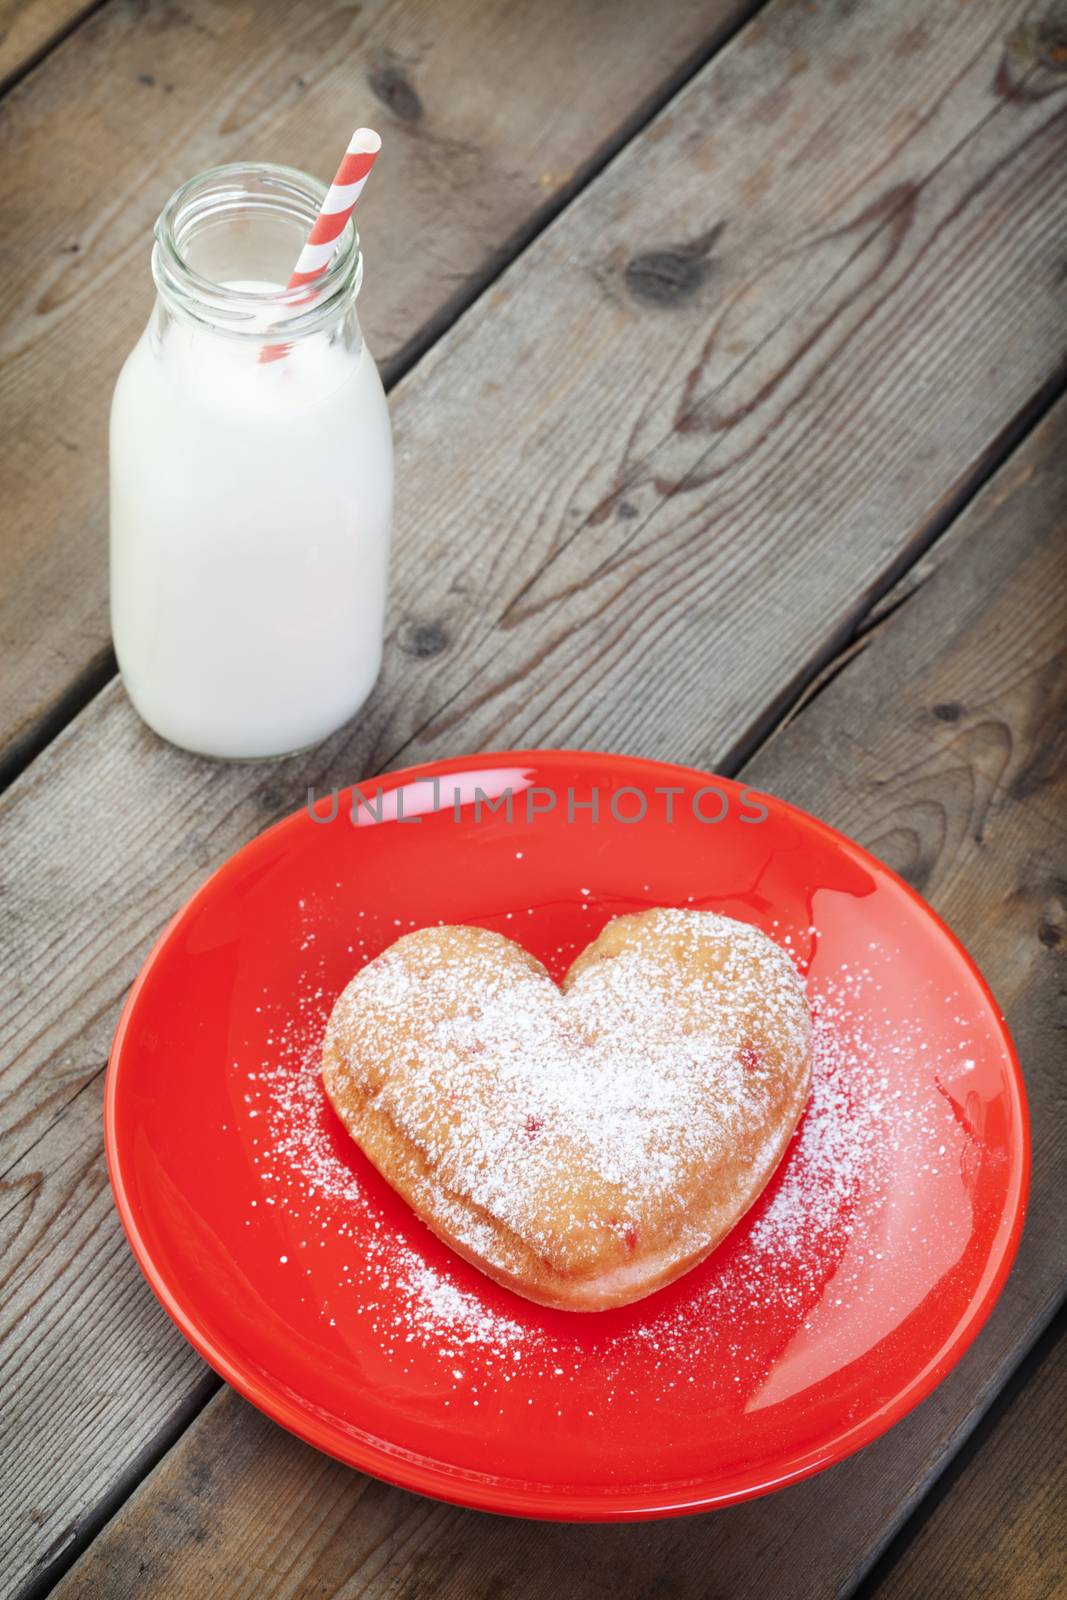 A heart-shaped doughnut sprinkled with icing sugar on a red plate.